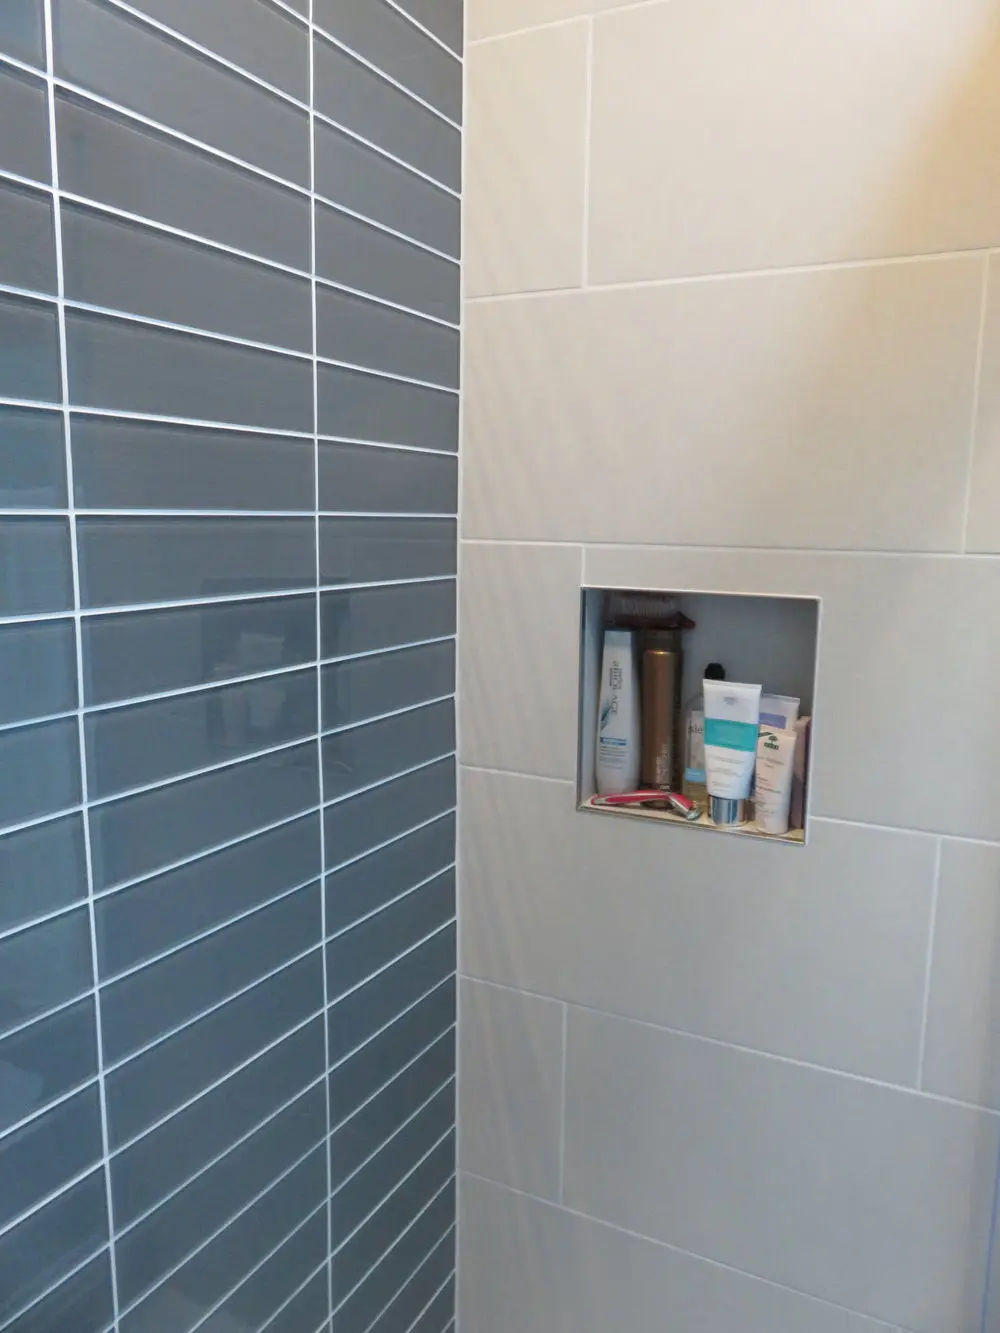 A closer look a the tile - one wall in charcoal glass and the other in ceramic with a criss cross design.